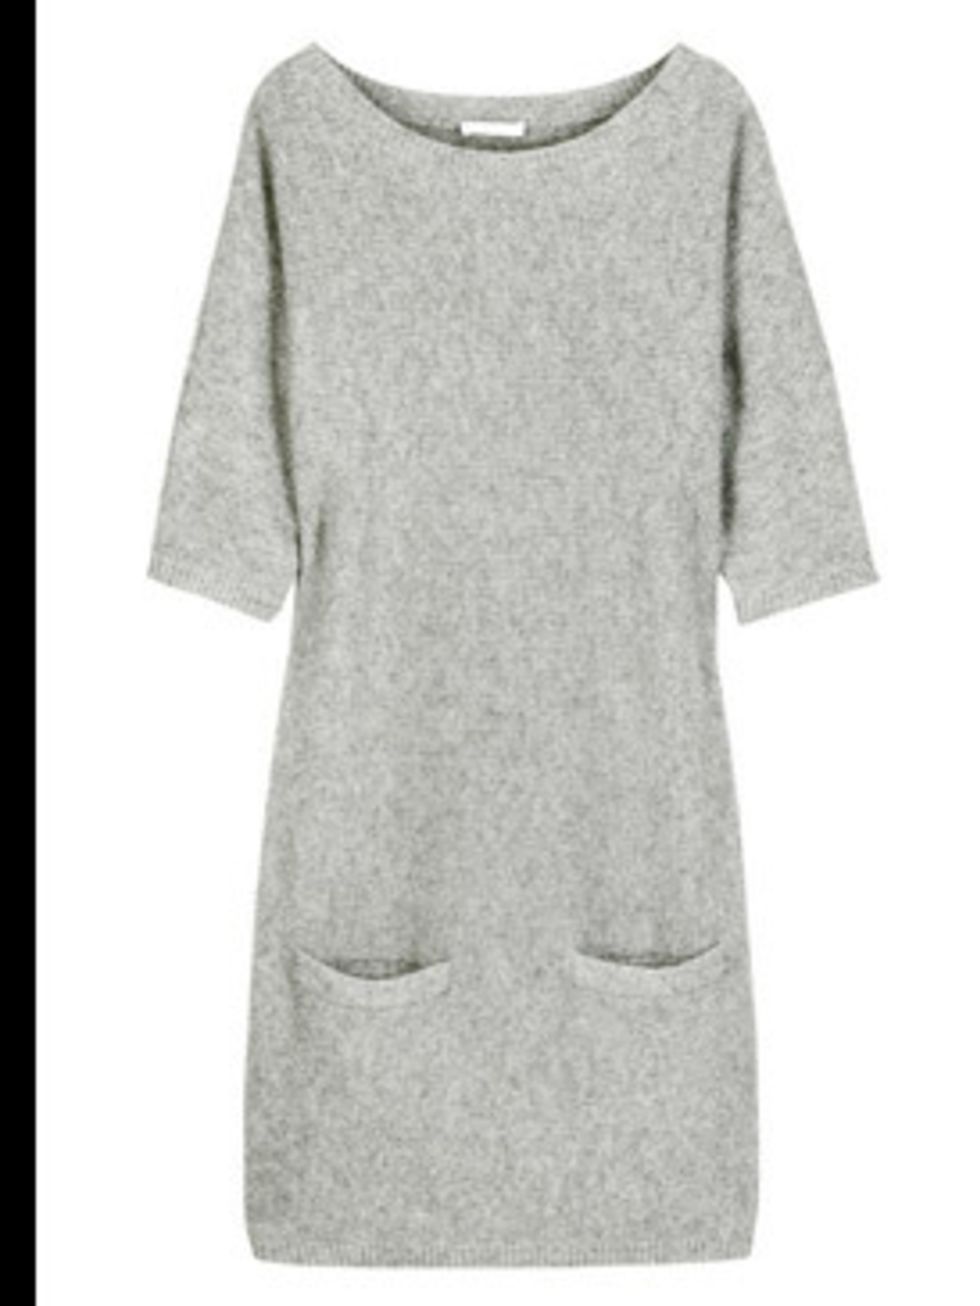 <p>Cashmere shift dress £480 by Chloe, available at <a href="http://www.net-a-porter.com/product/46882">Net-A-Porter</a></p>